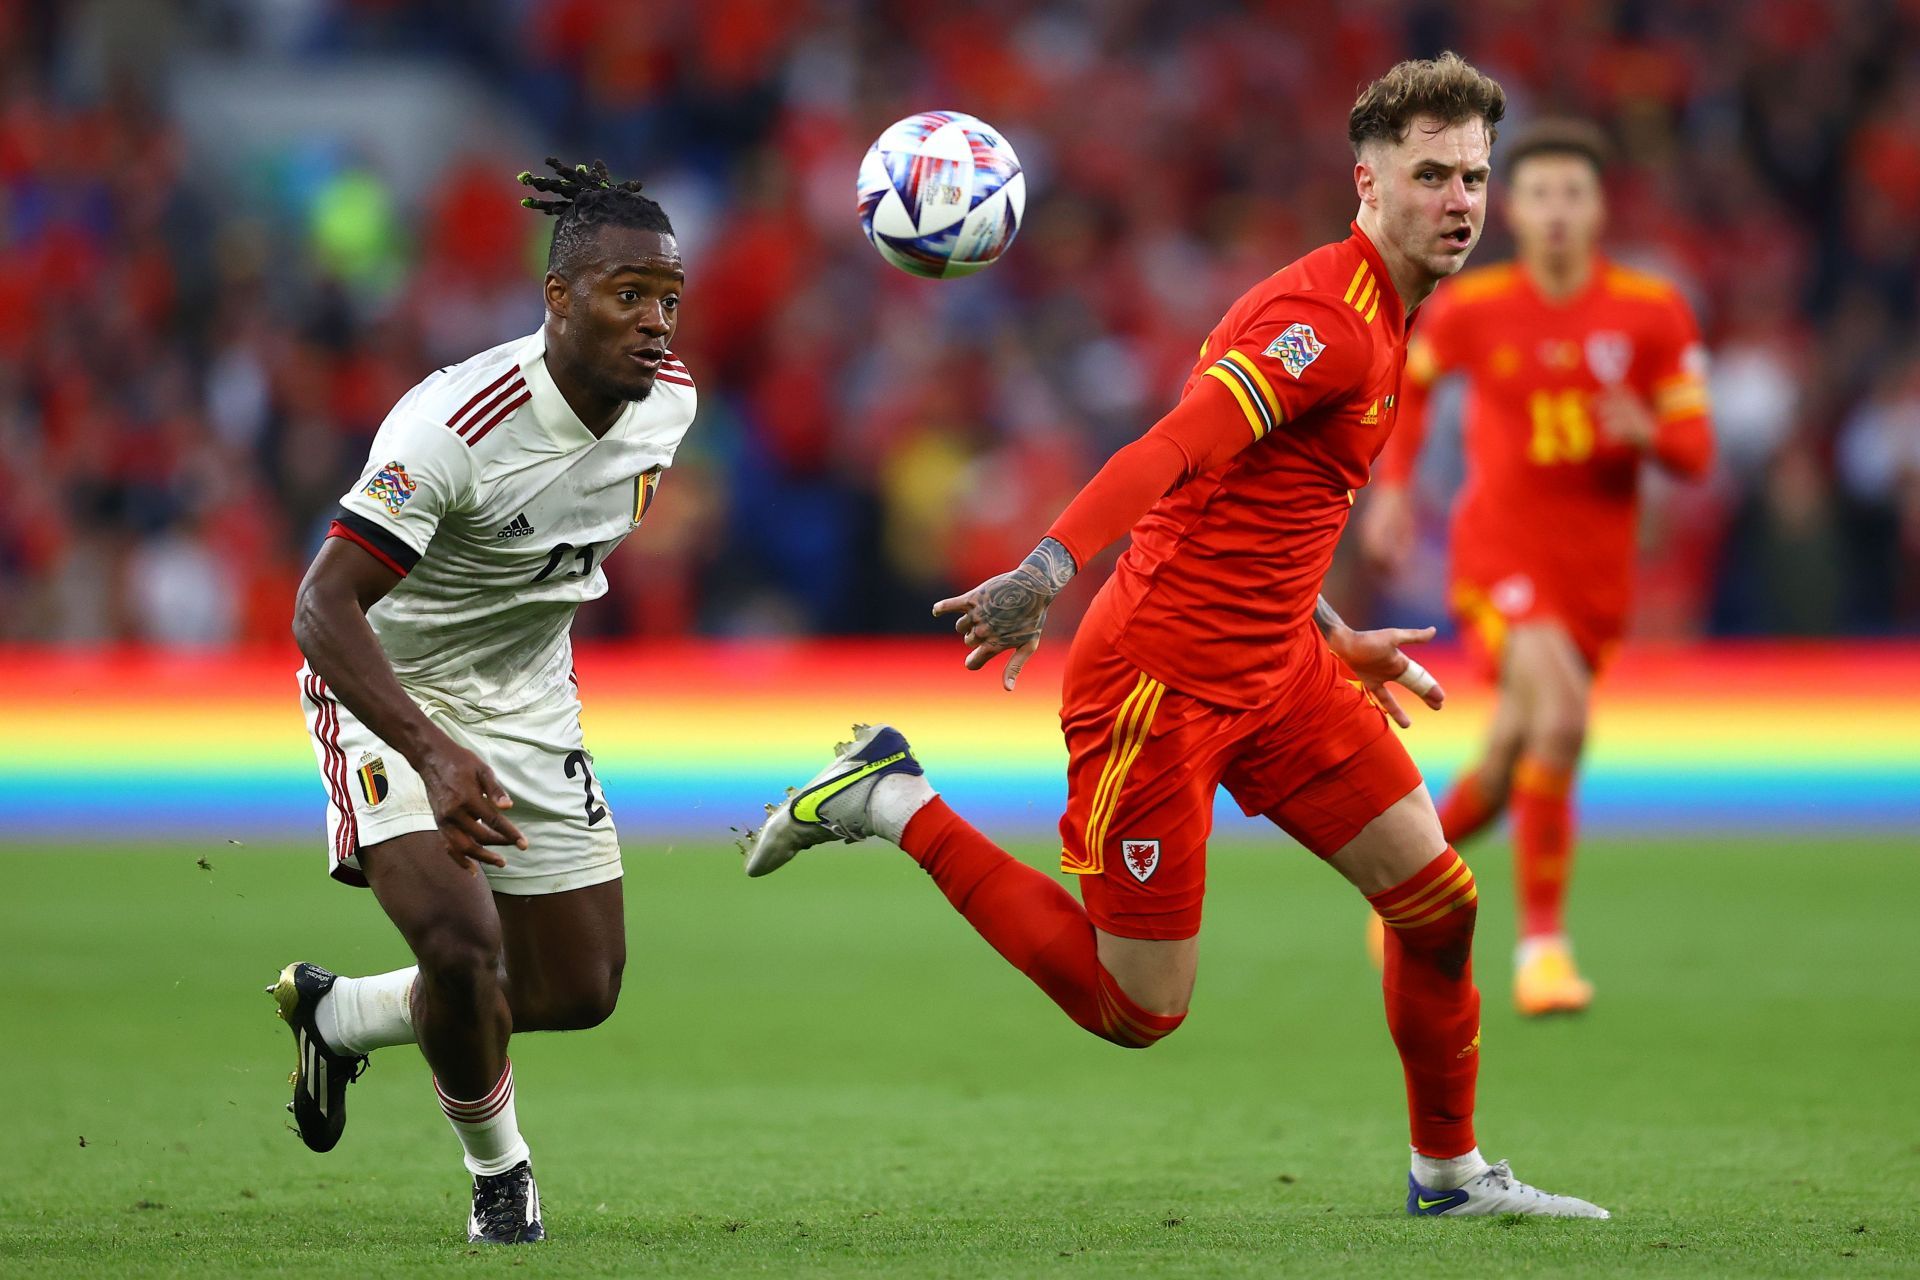 Michy Batshuayi tussles it out against Wales.